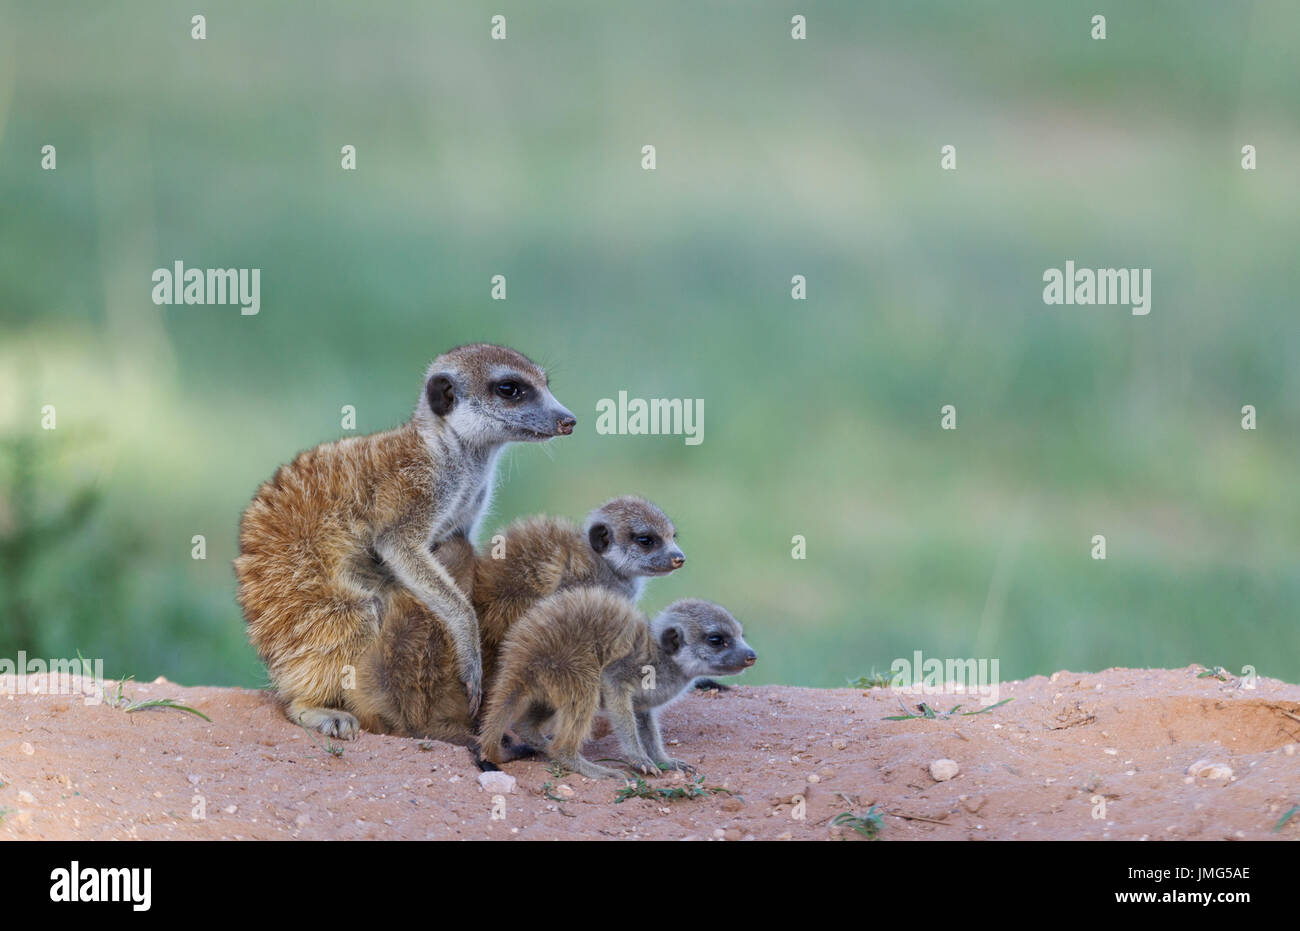 Suricate (Suricata suricatta). Female with three young in the eveninght at their burrow. One young is suckling. During the rainy season in green surroundings. Kalahari Desert, Kgalagadi Transfrontier Park, South Africa. Stock Photo